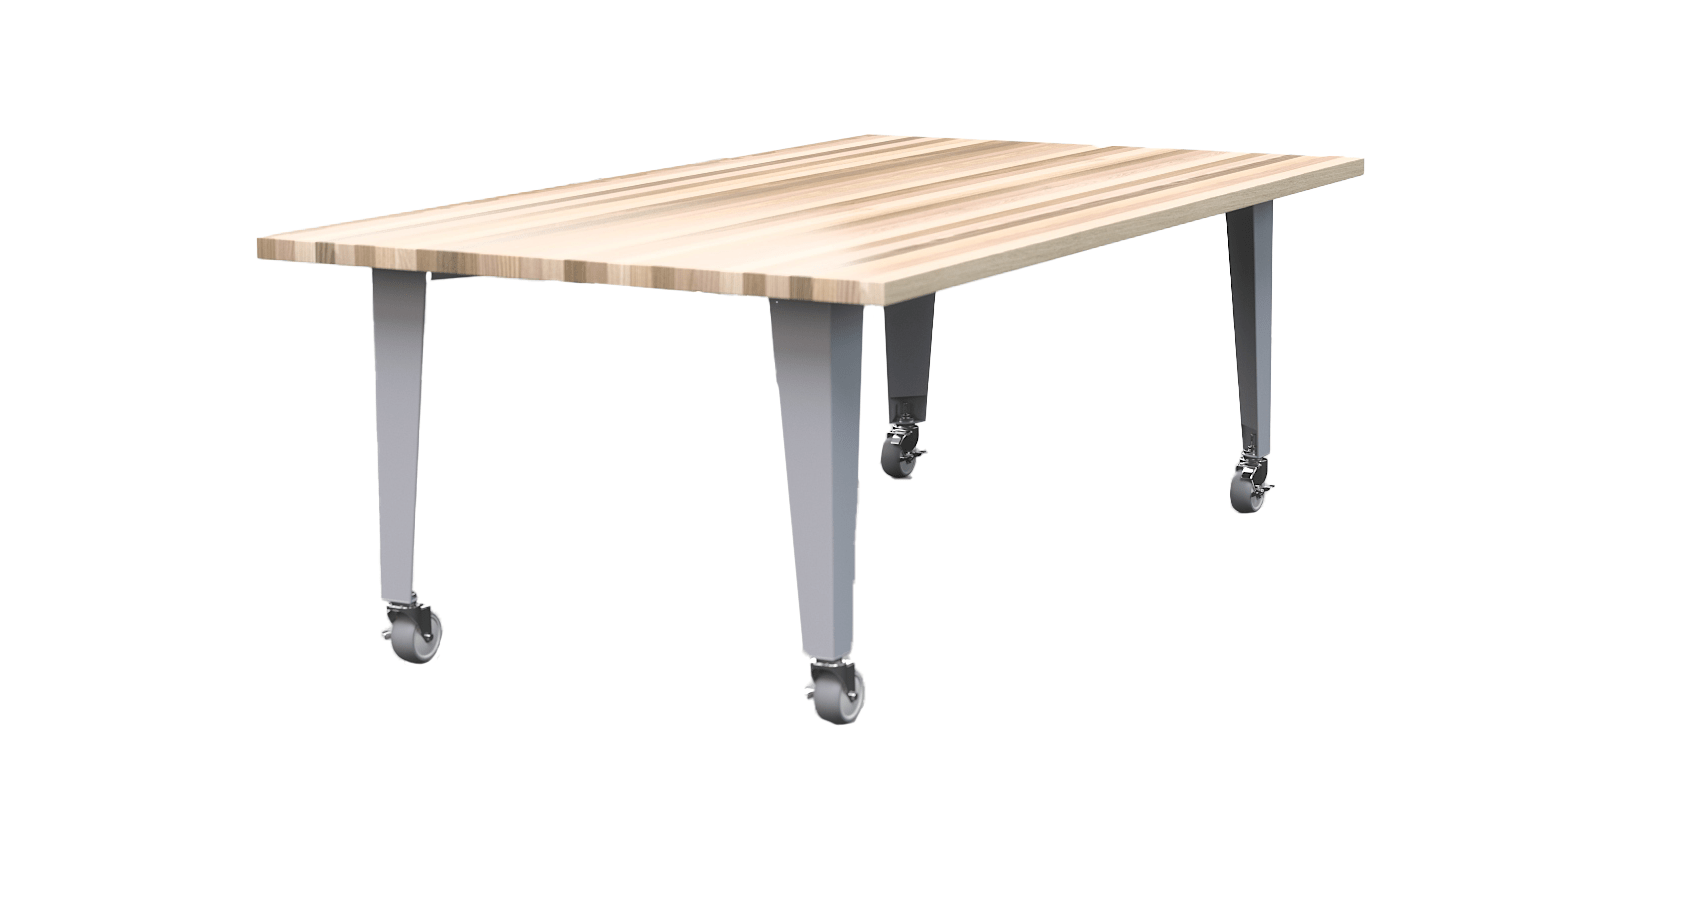 CEF IDEA Island Table 30" Height - Butcher Block Top 84"W x 48"D with Steel Frame, Cable Management and Heavy Duty Locking Casters (No Electric) - SchoolOutlet